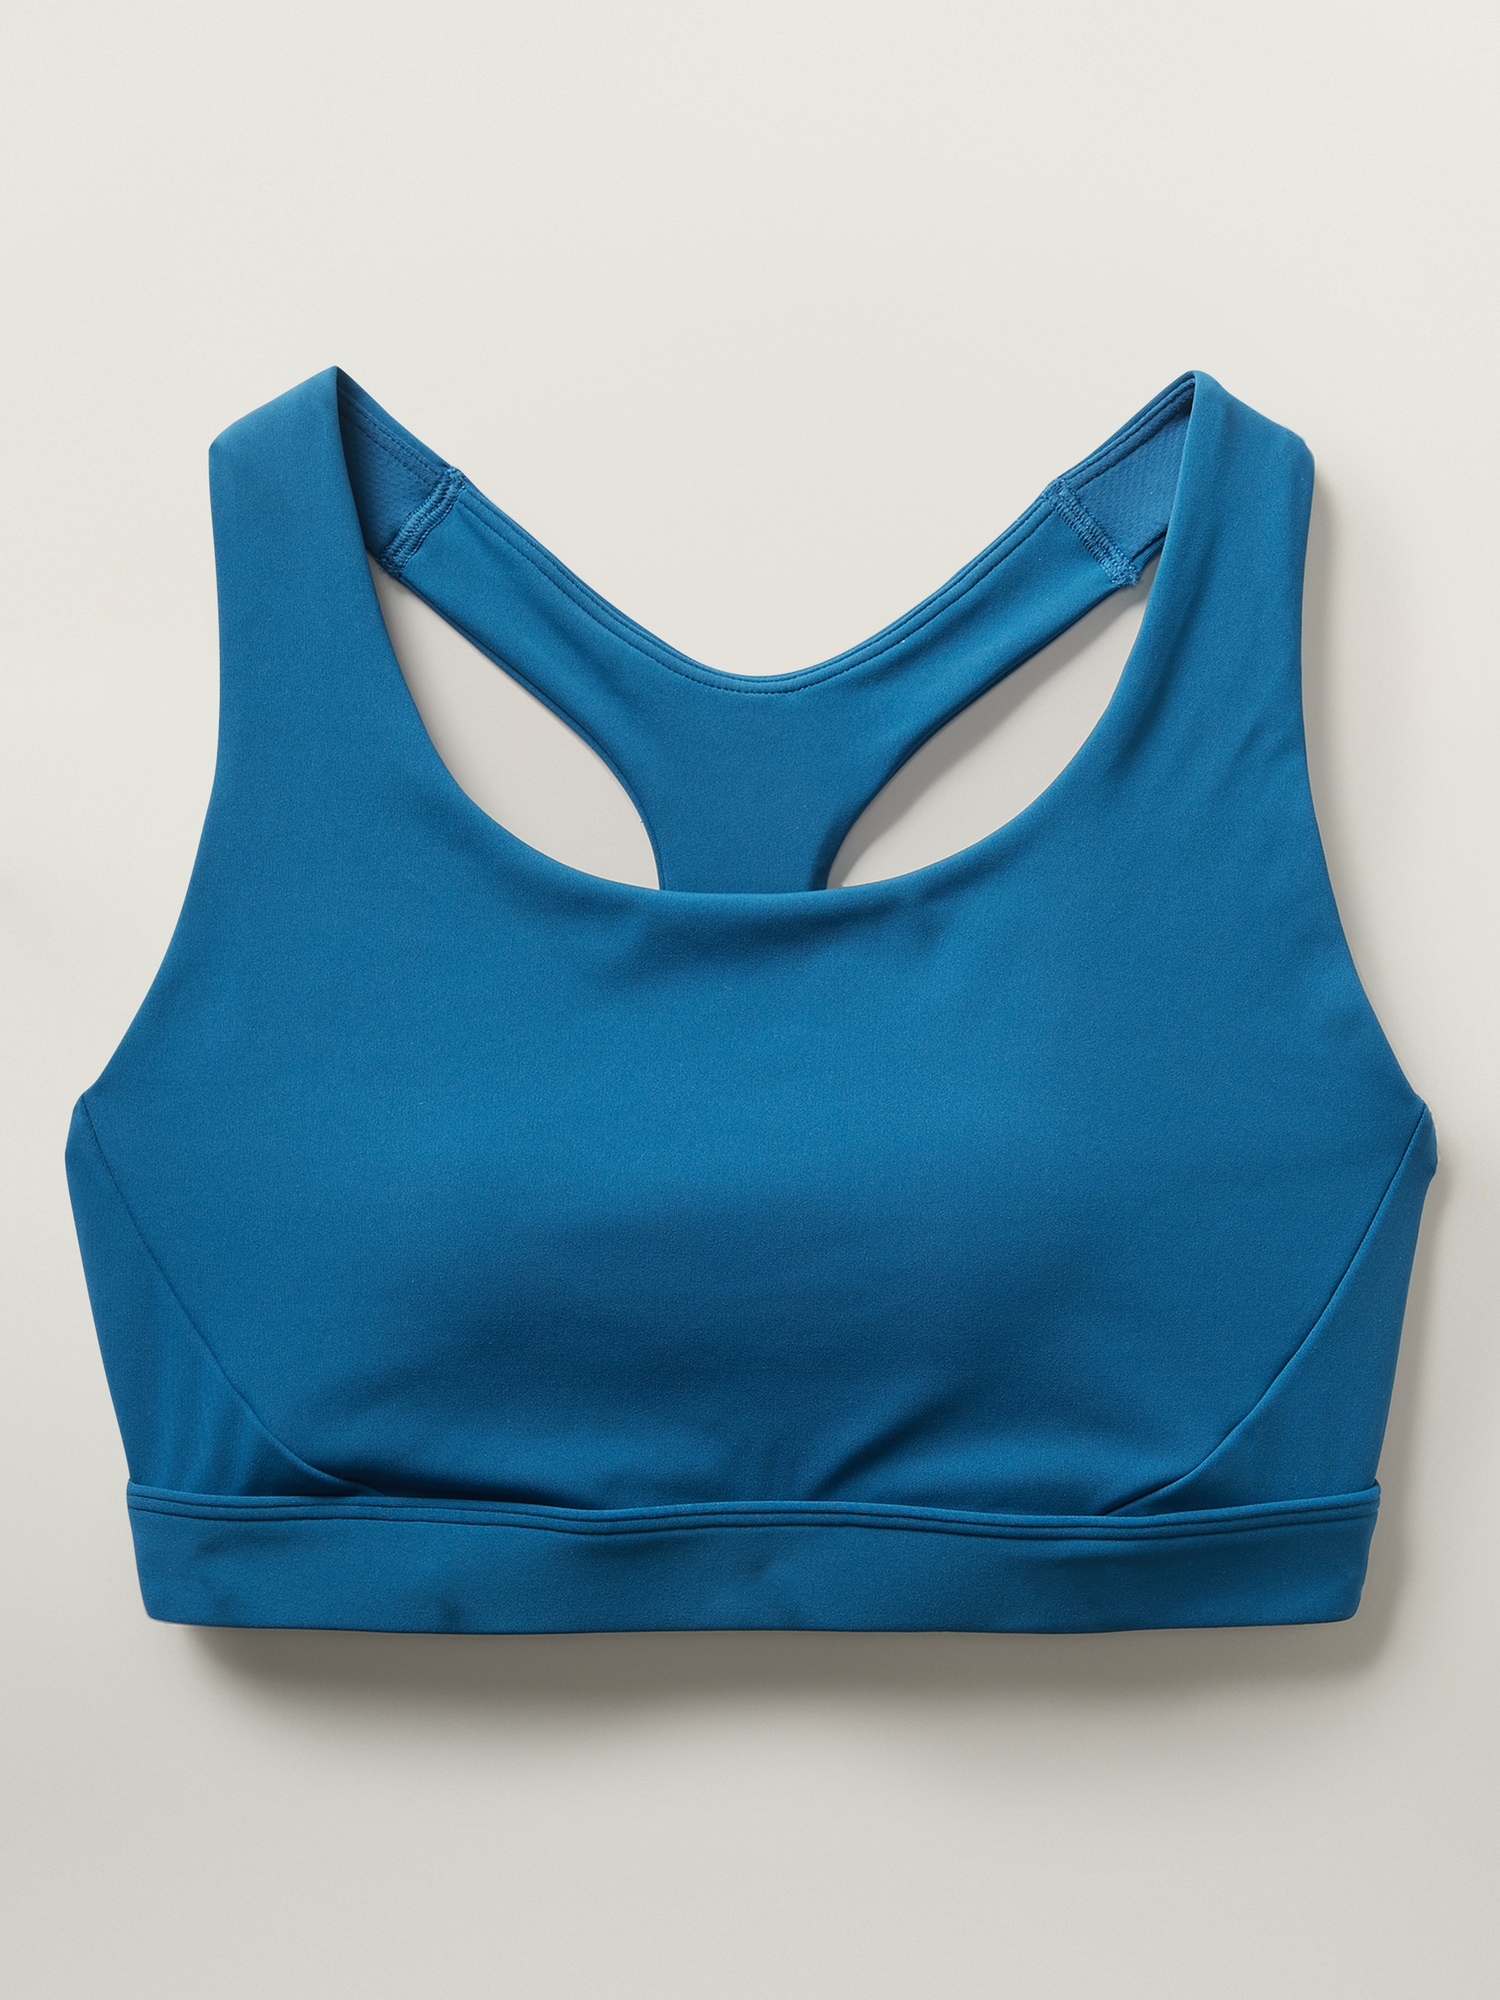 Best Sports Bras for Augmented Breasts